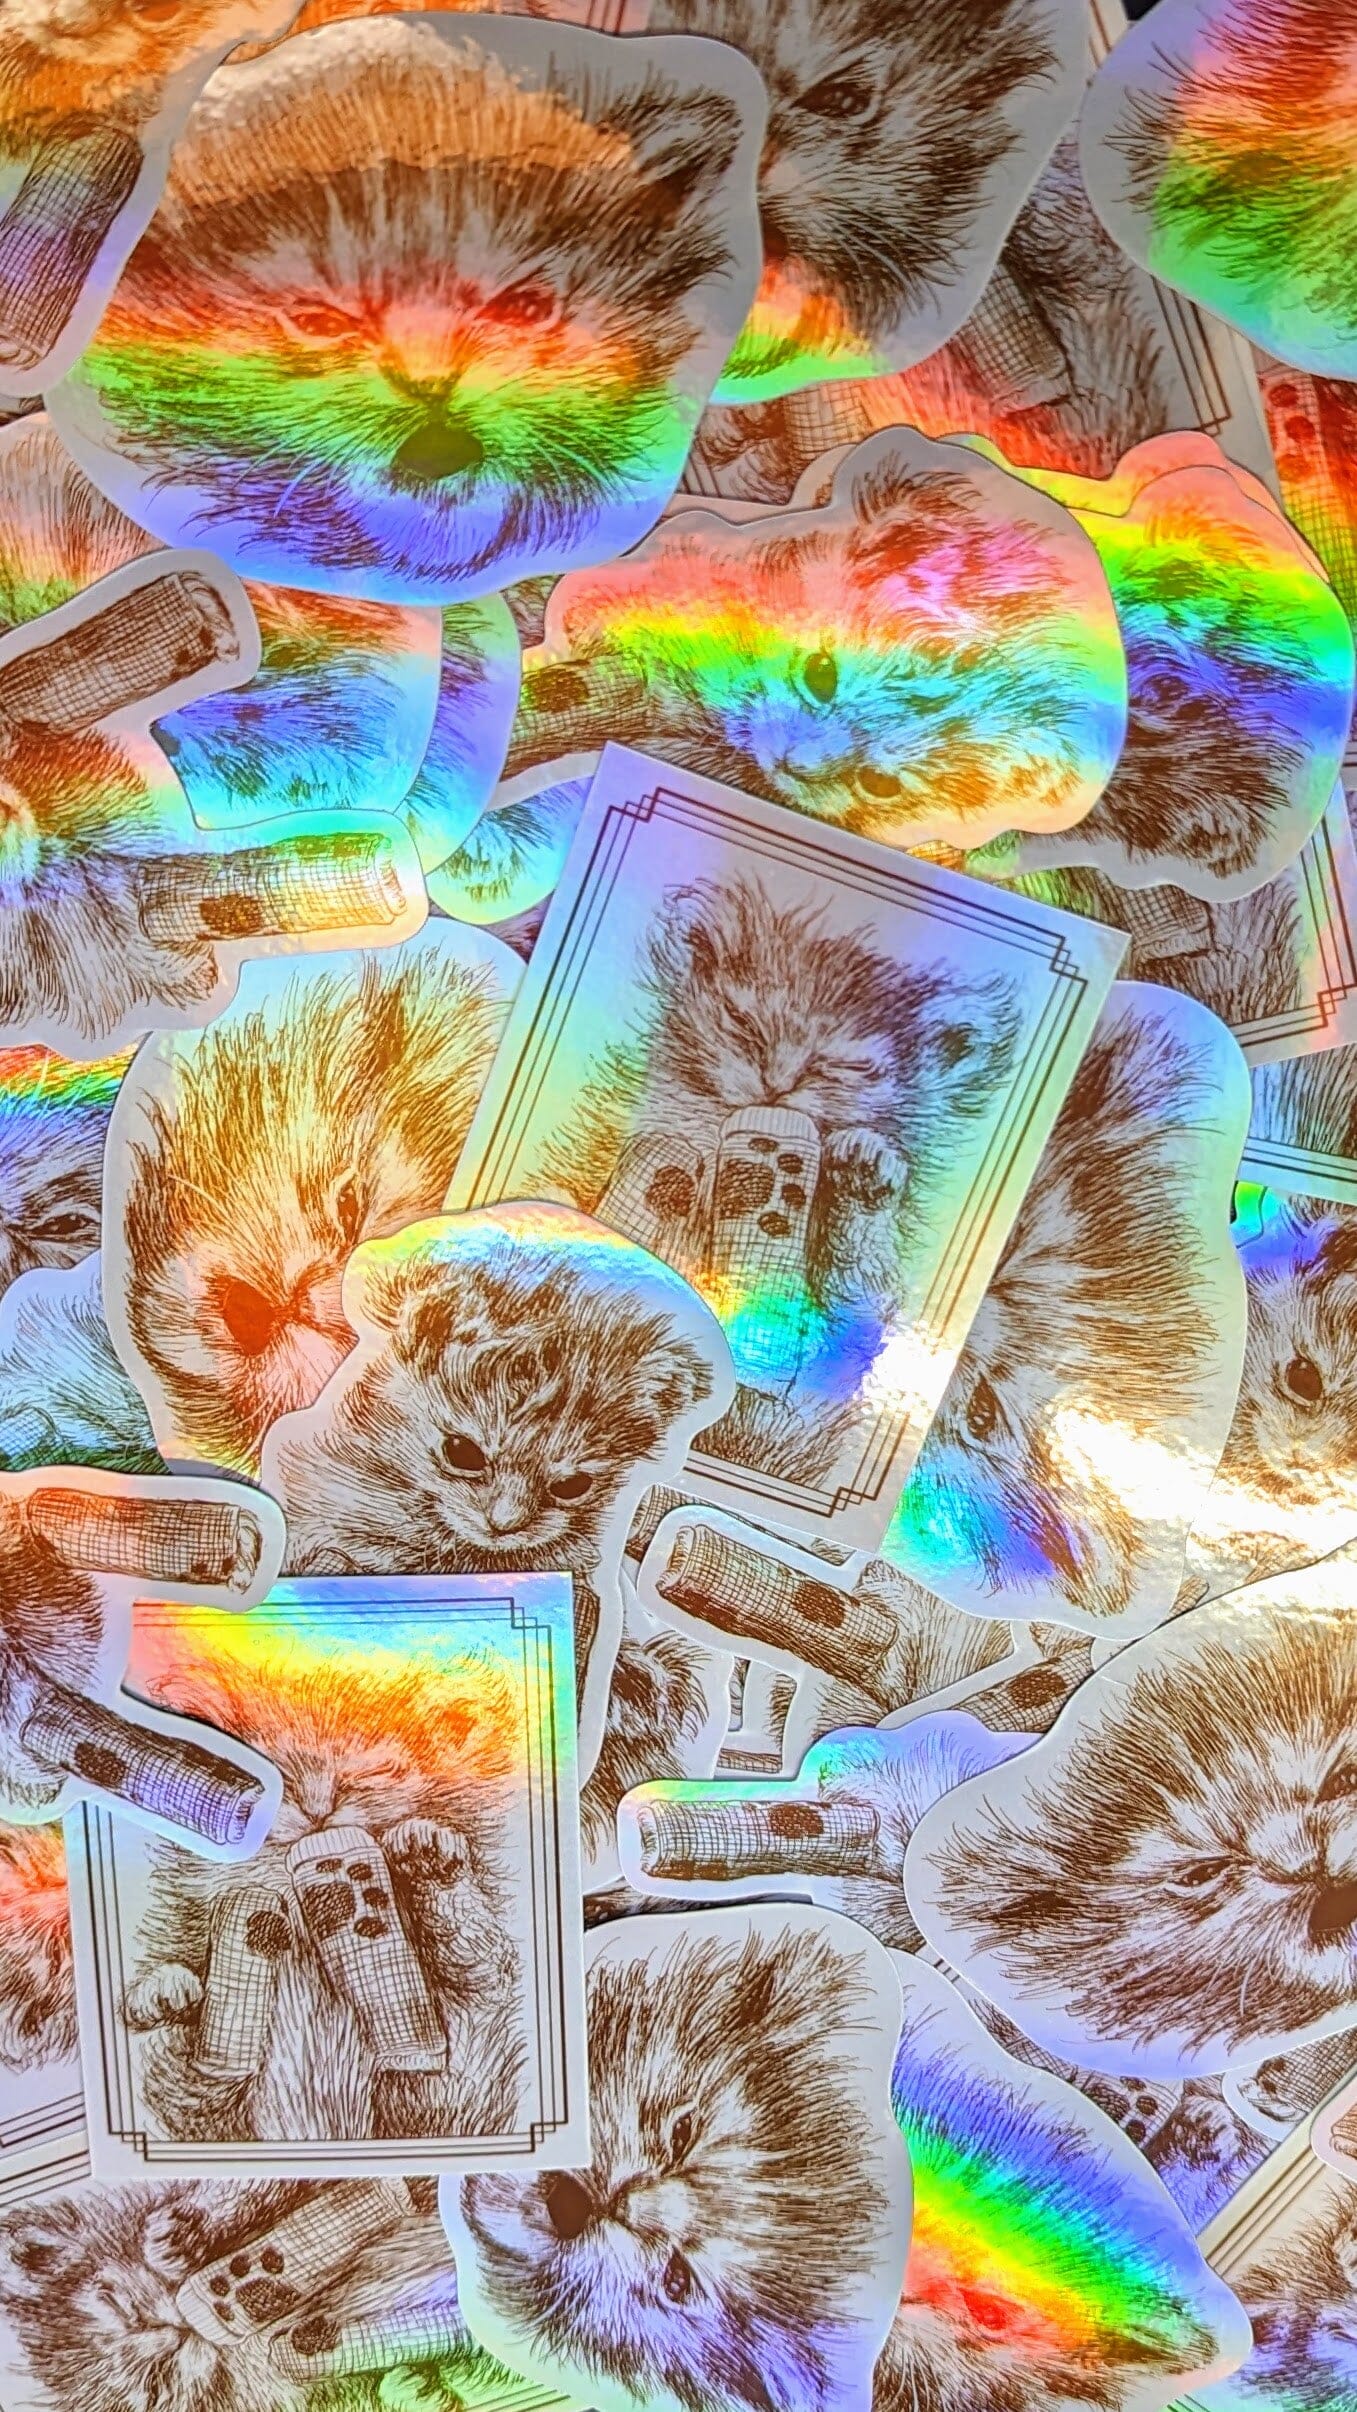 Tater Tot and his Bonkers Holographic Sticker ($1 donated to Kitty CrusAIDe per sticker sold) Decorative Stickers JoyousJoyfulJoyness 